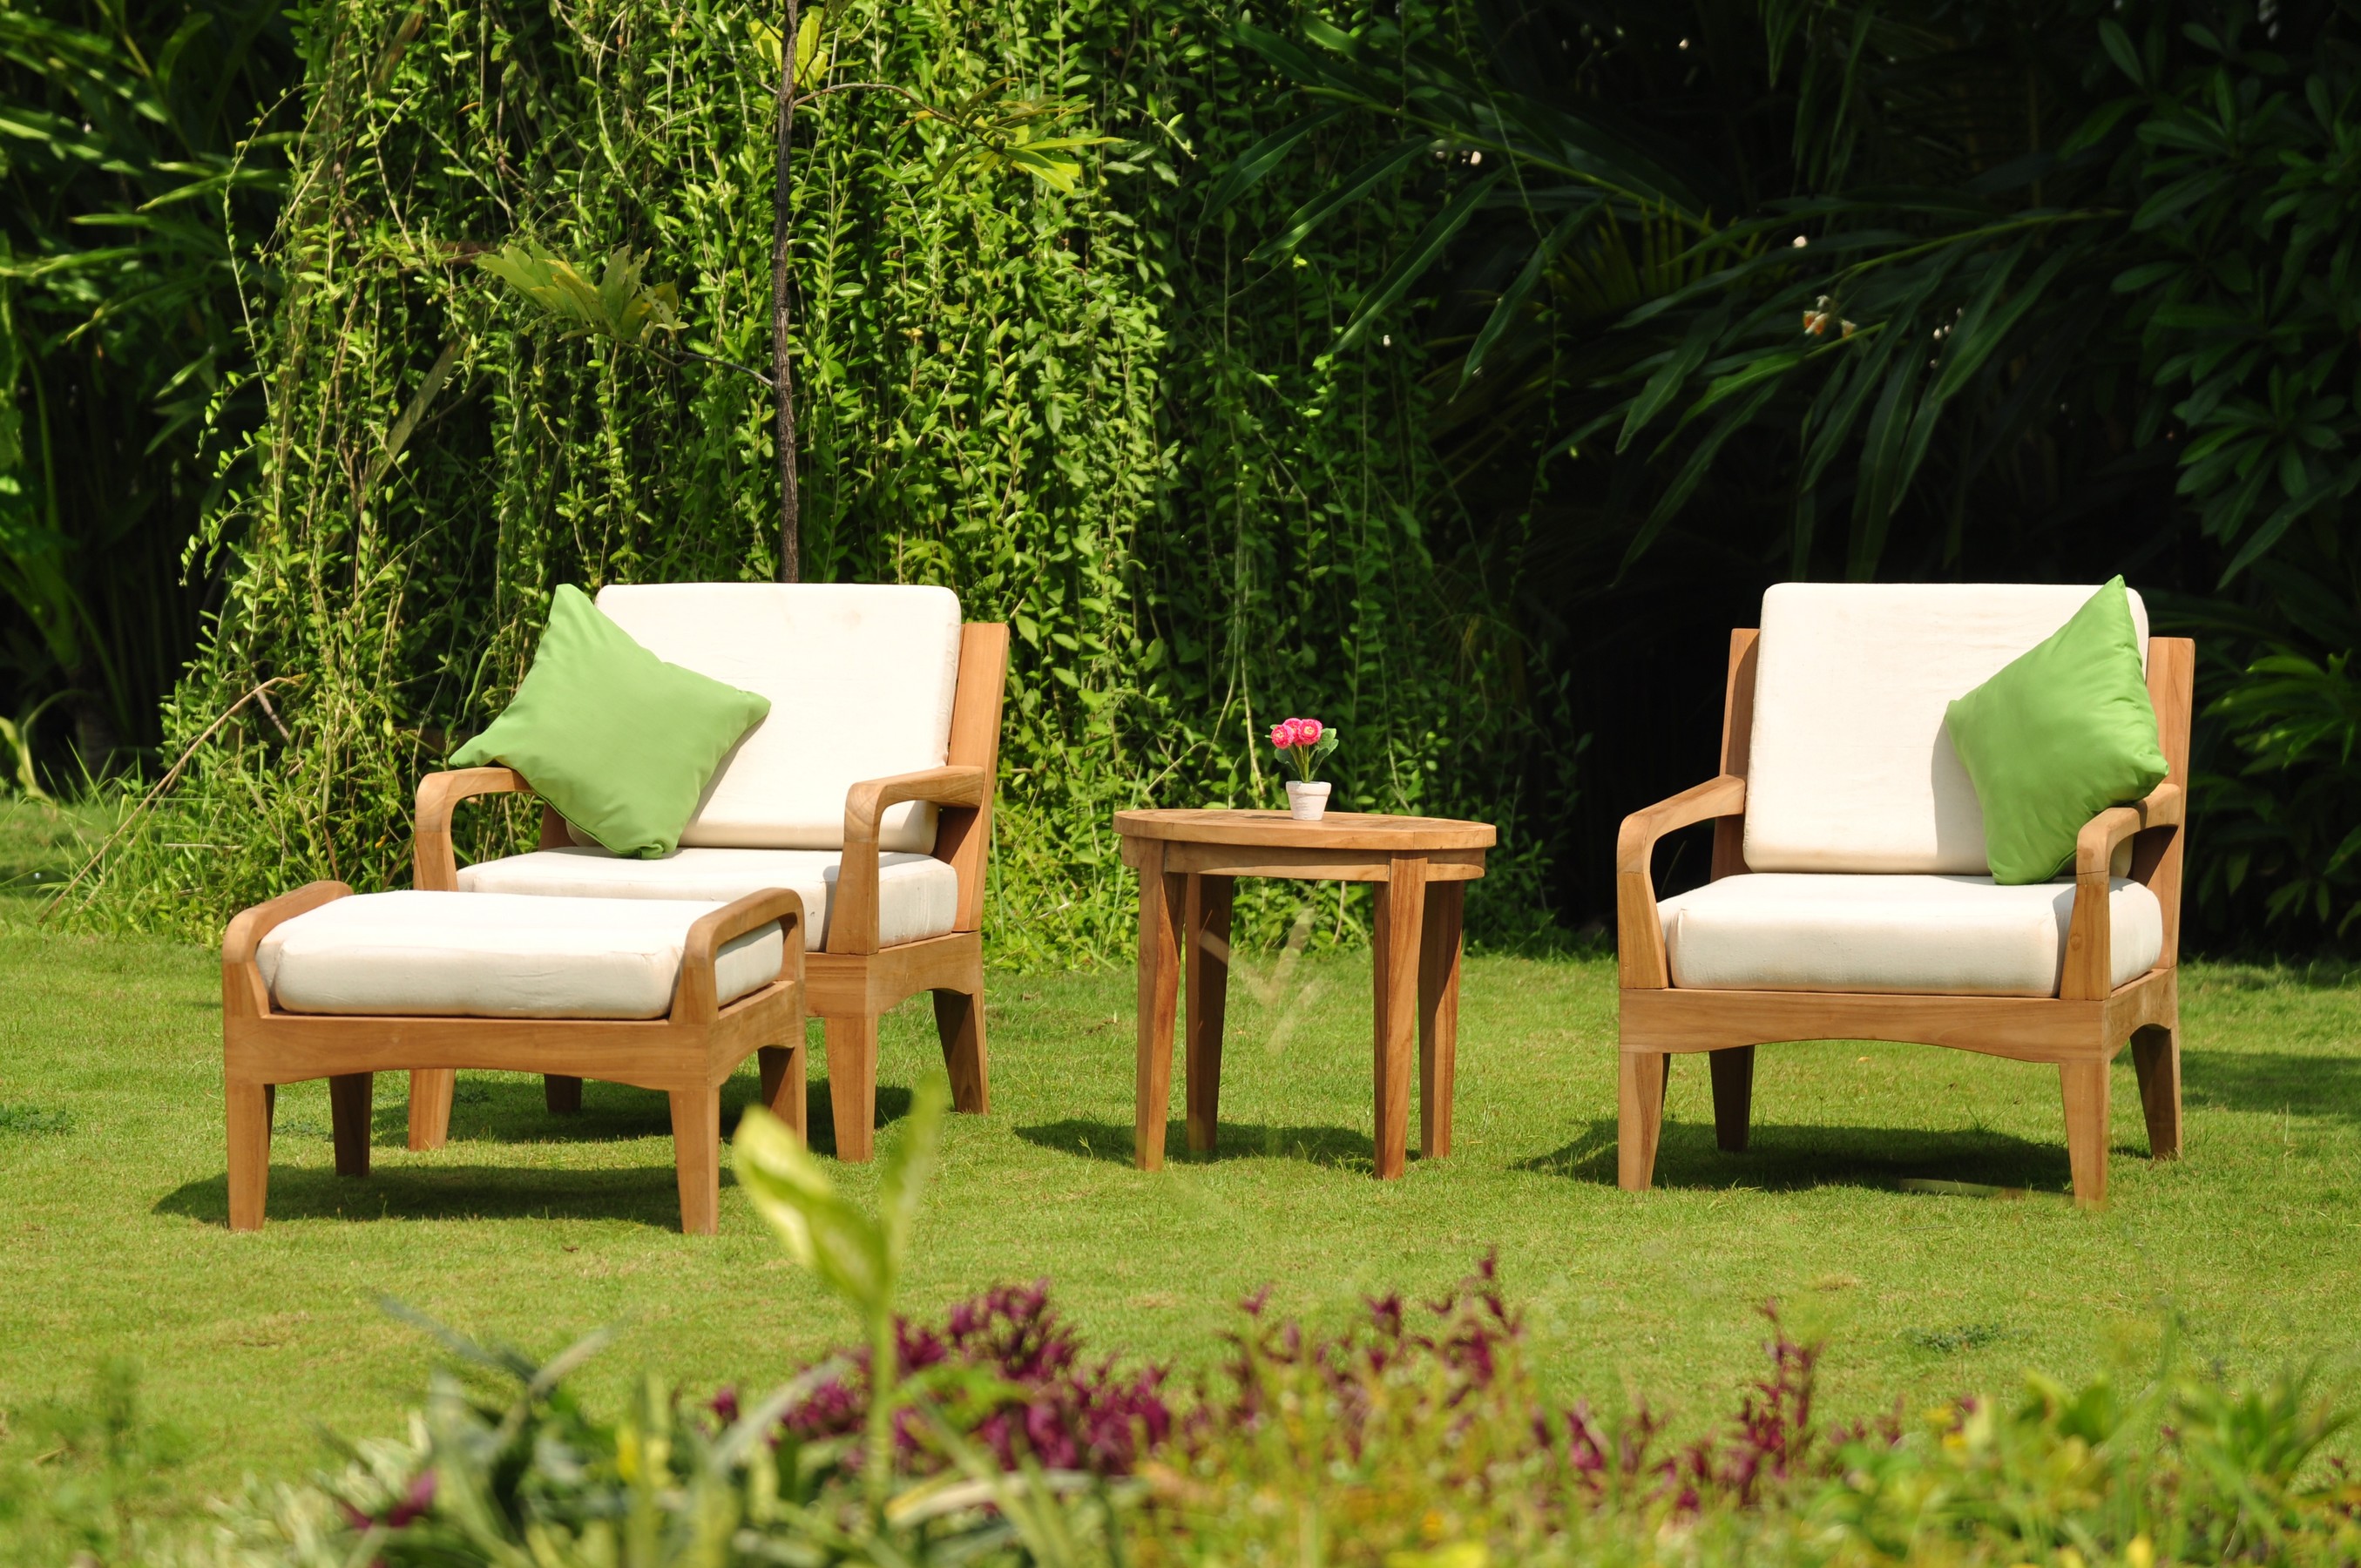 WholesaleTeak Outdoor Patio Grade-A Teak Wood 4 Piece Teak Sofa Lounge Chair Set - 2 Lounge Chairs, 1 Ottoman And 1 Round End Table - Furniture only - Noida COLLECTION #WMSSNO4 - image 2 of 2